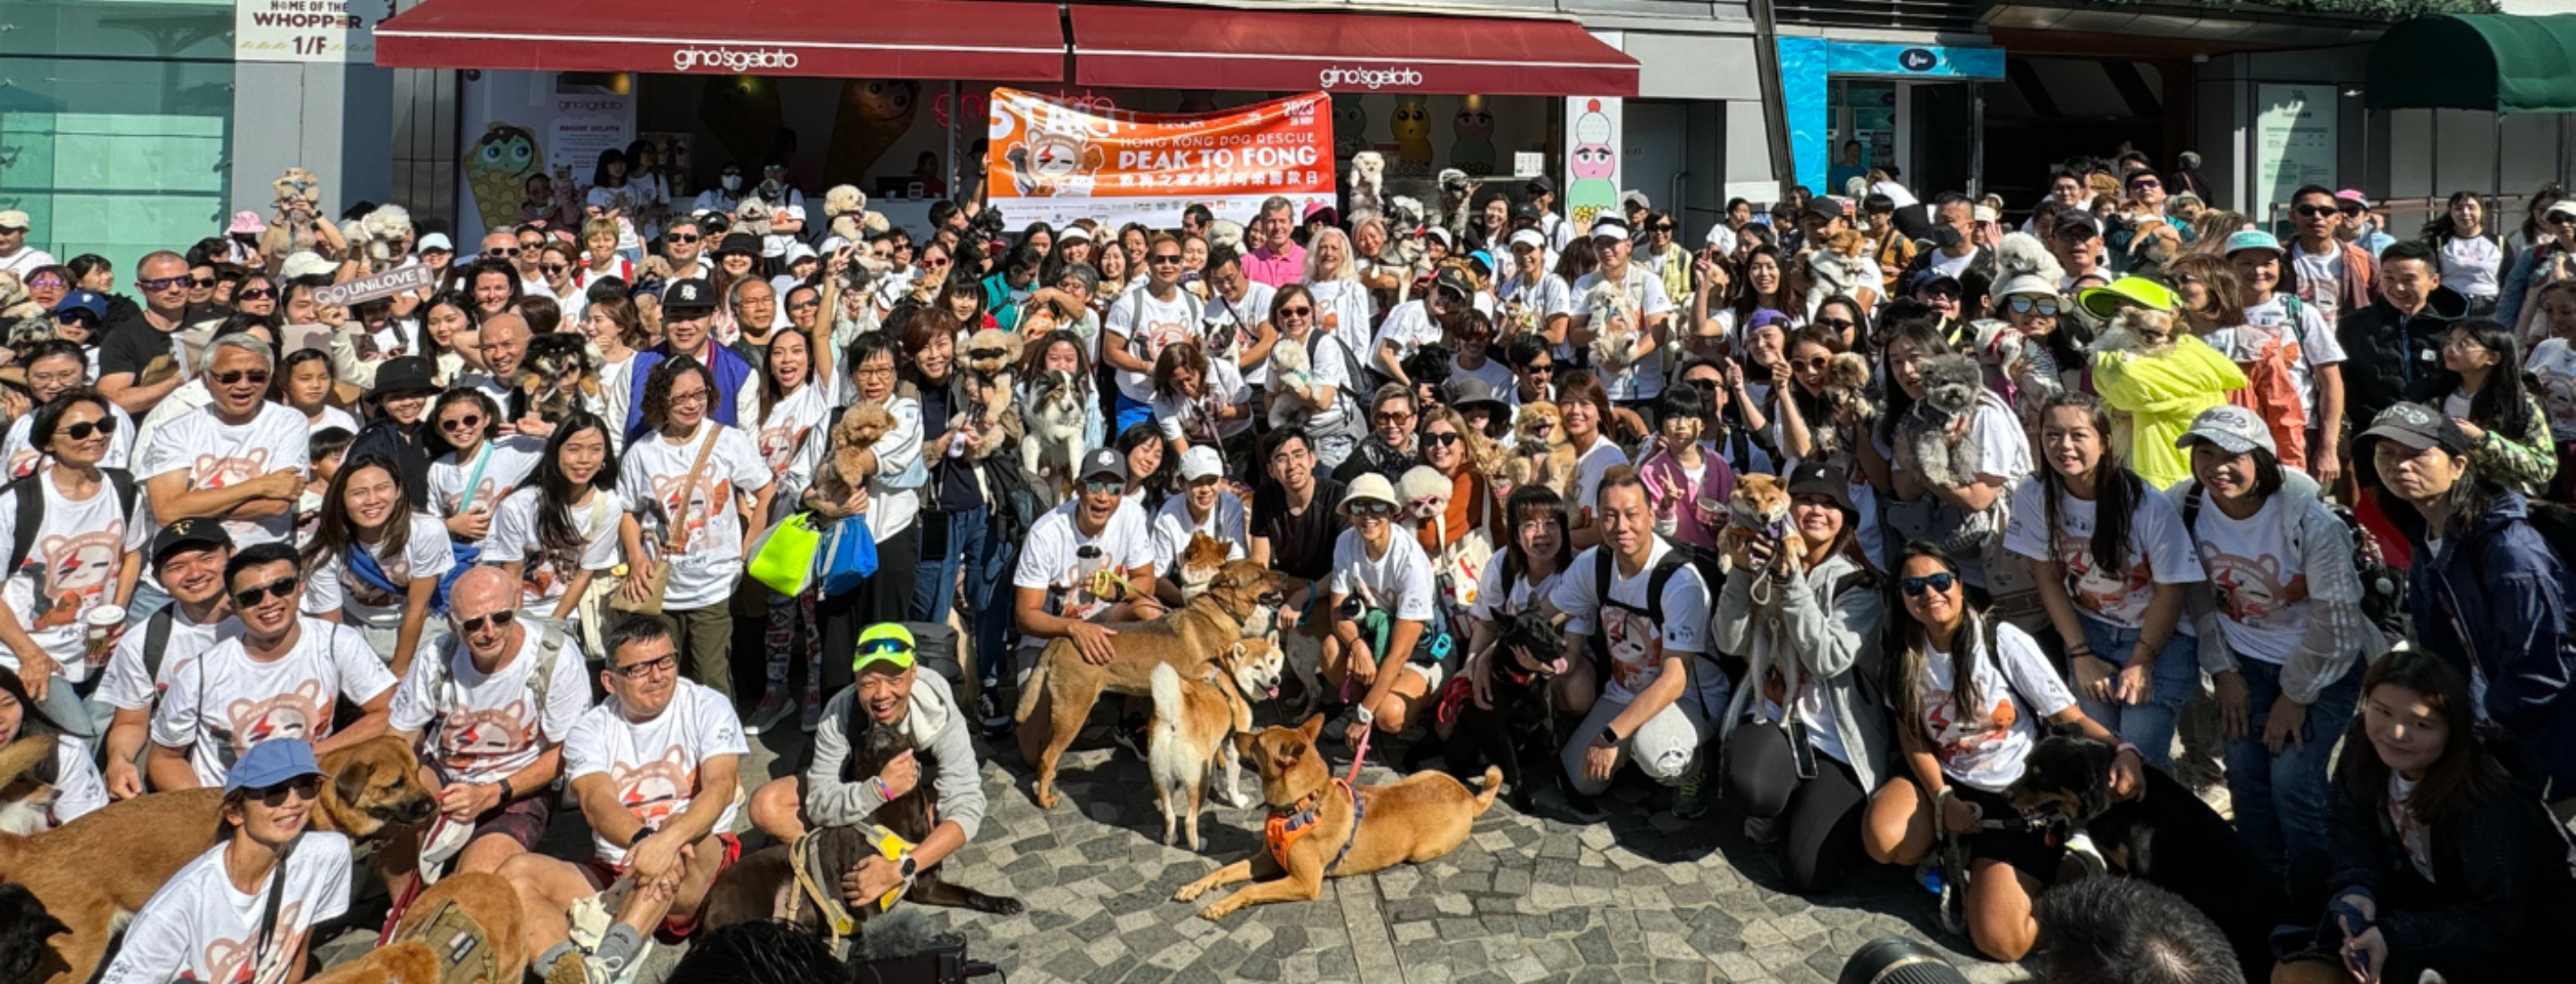 Dog Fun Fundraising Day | Charity Walk + Street Party for Abandoned Dogs   Give a Helping Paw to Abandoned Dogs!